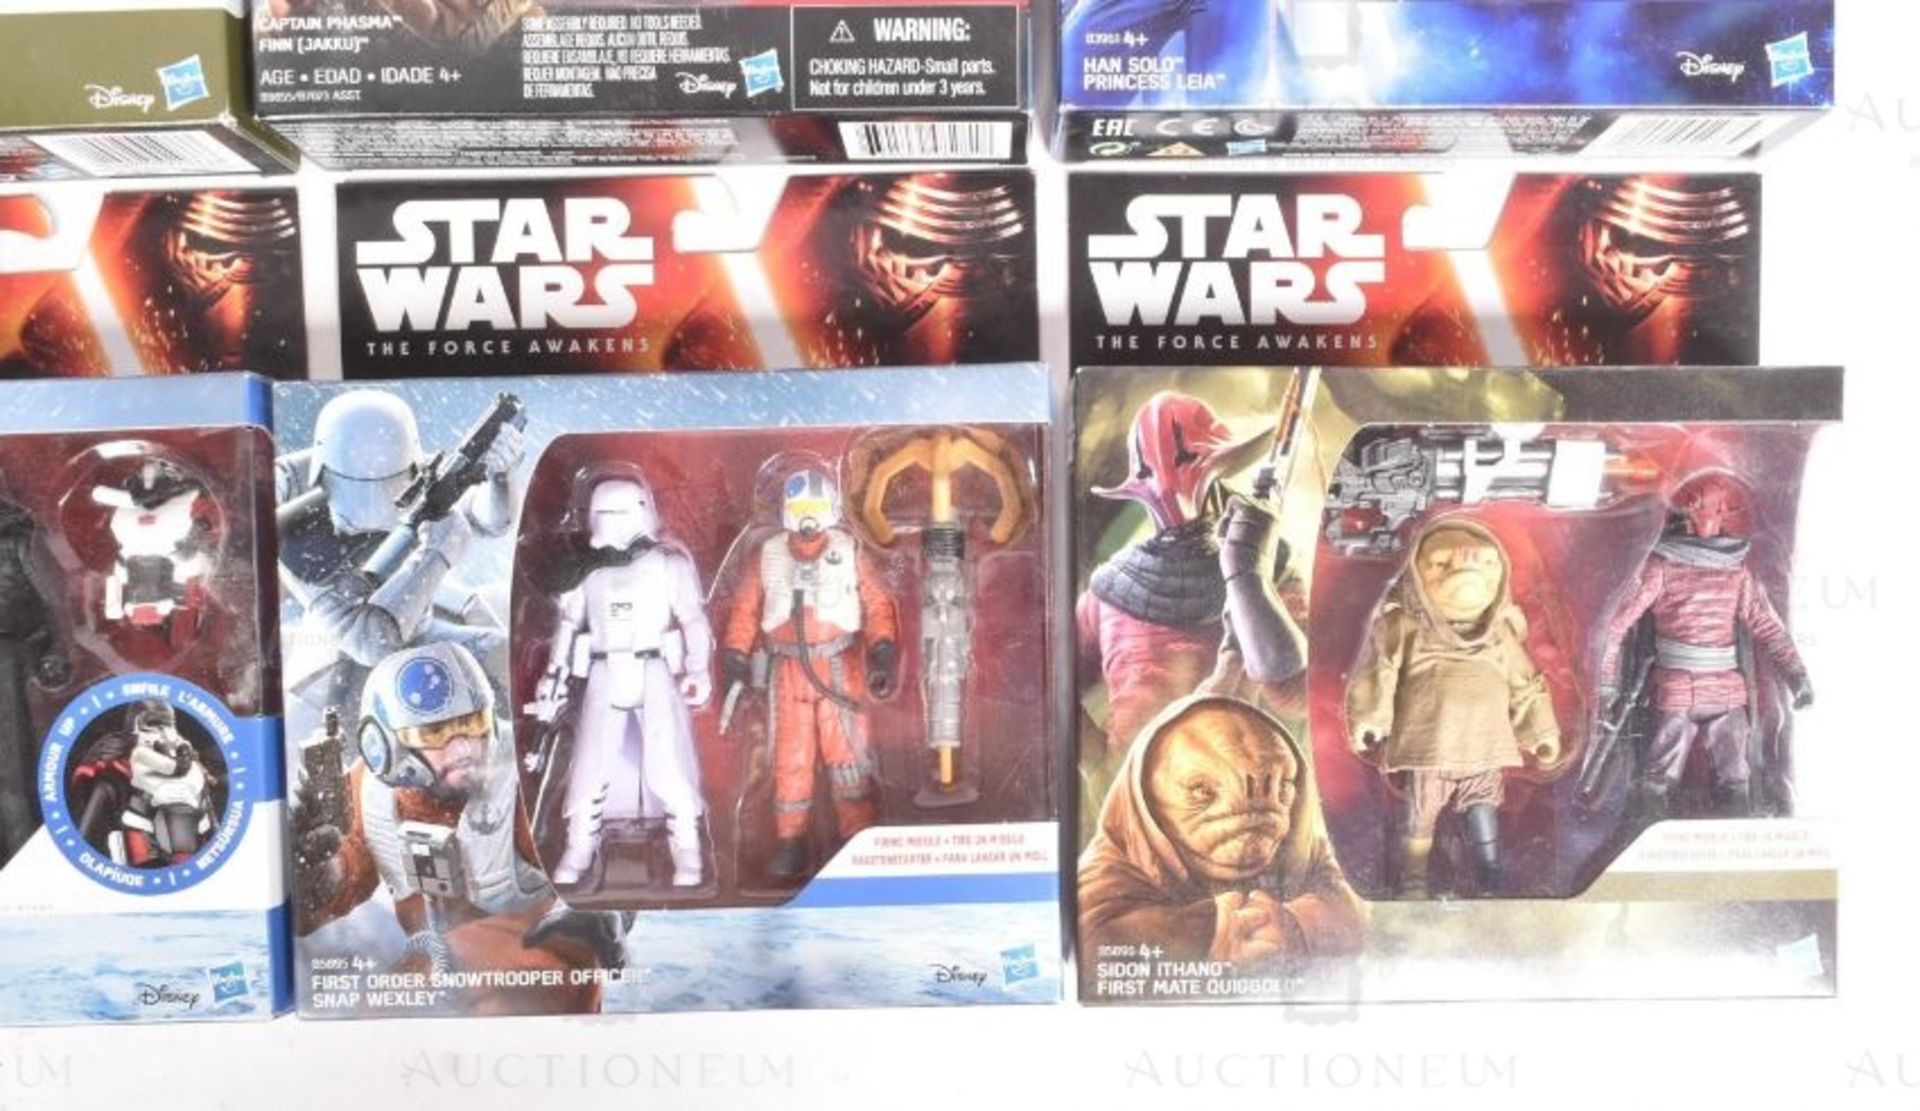 STAR WARS - DISNEY - BOXED ACTION FIGURES - Image 2 of 6